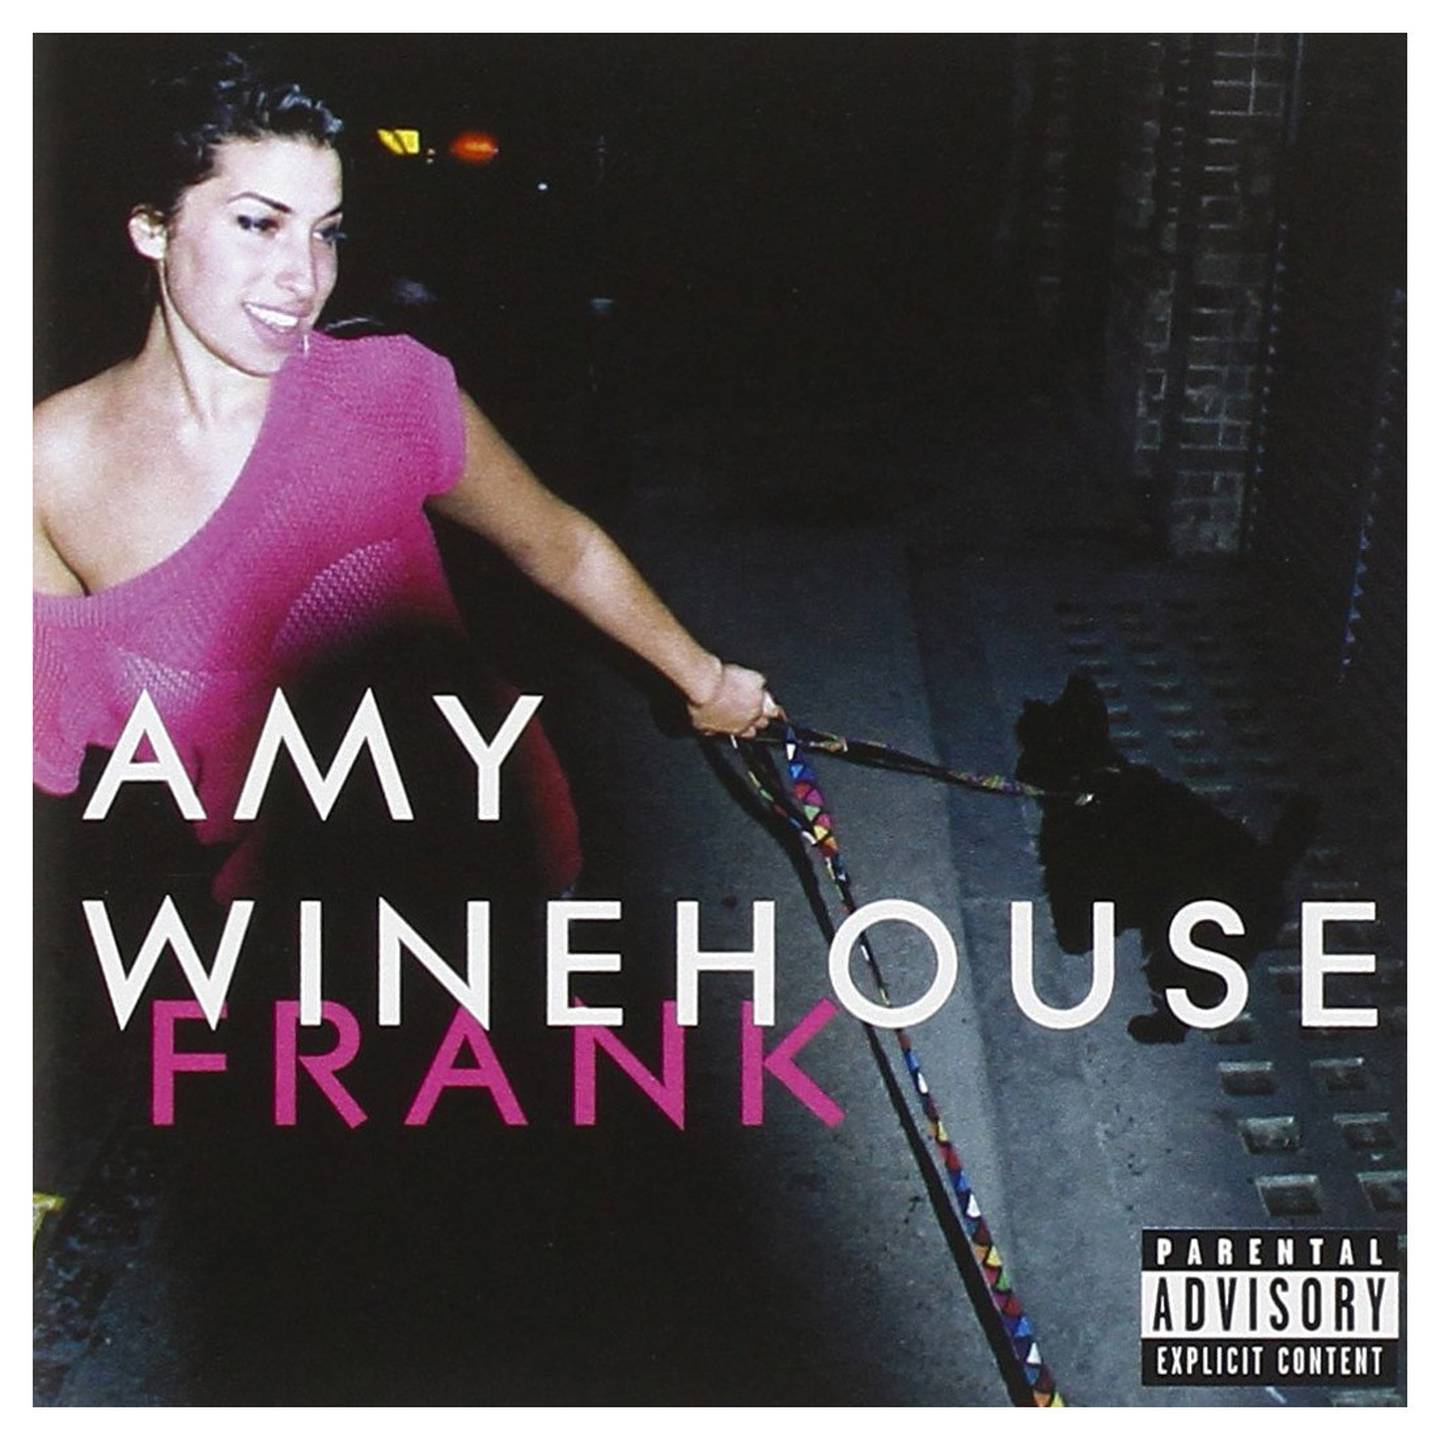 Irish photographer Charles Moriarty took the photograph that adorns Amy Winehouse's debut album, 'Frank'. Island Record